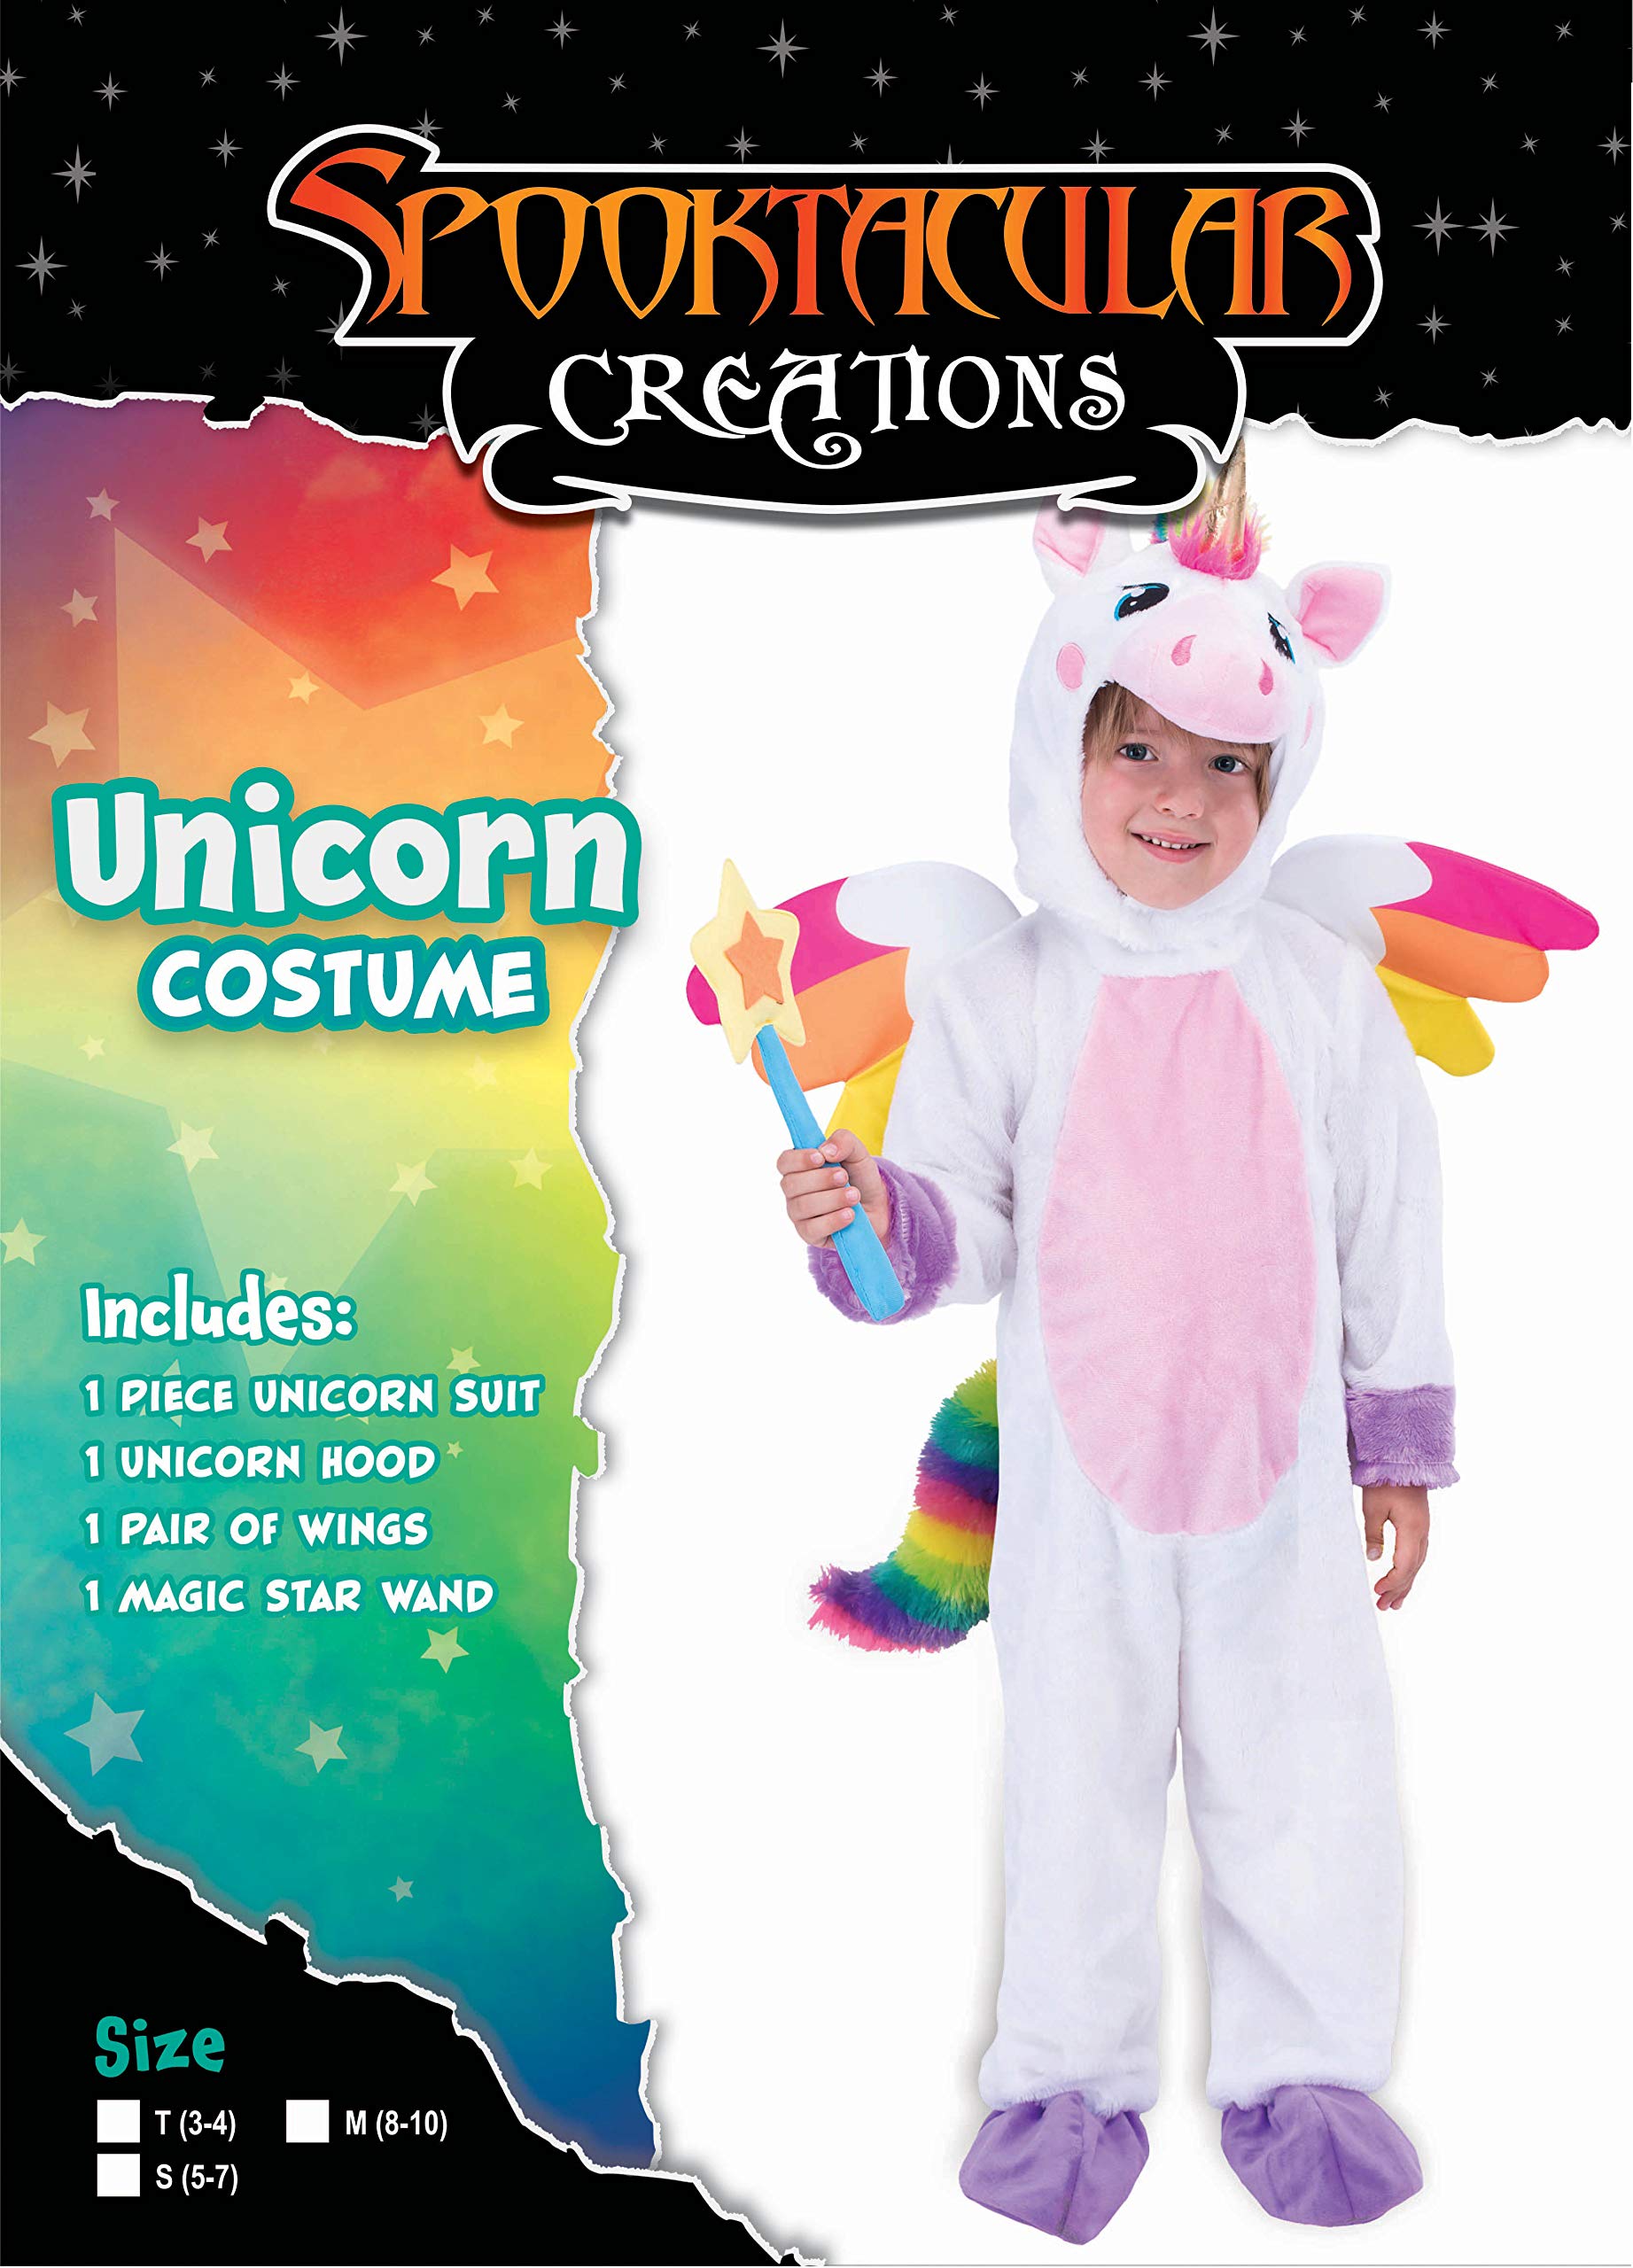 Spooktacular Creations Unicorn Costume Deluxe Set for Kids Halloween Animal Dress Up Party, Role play and Cosplay